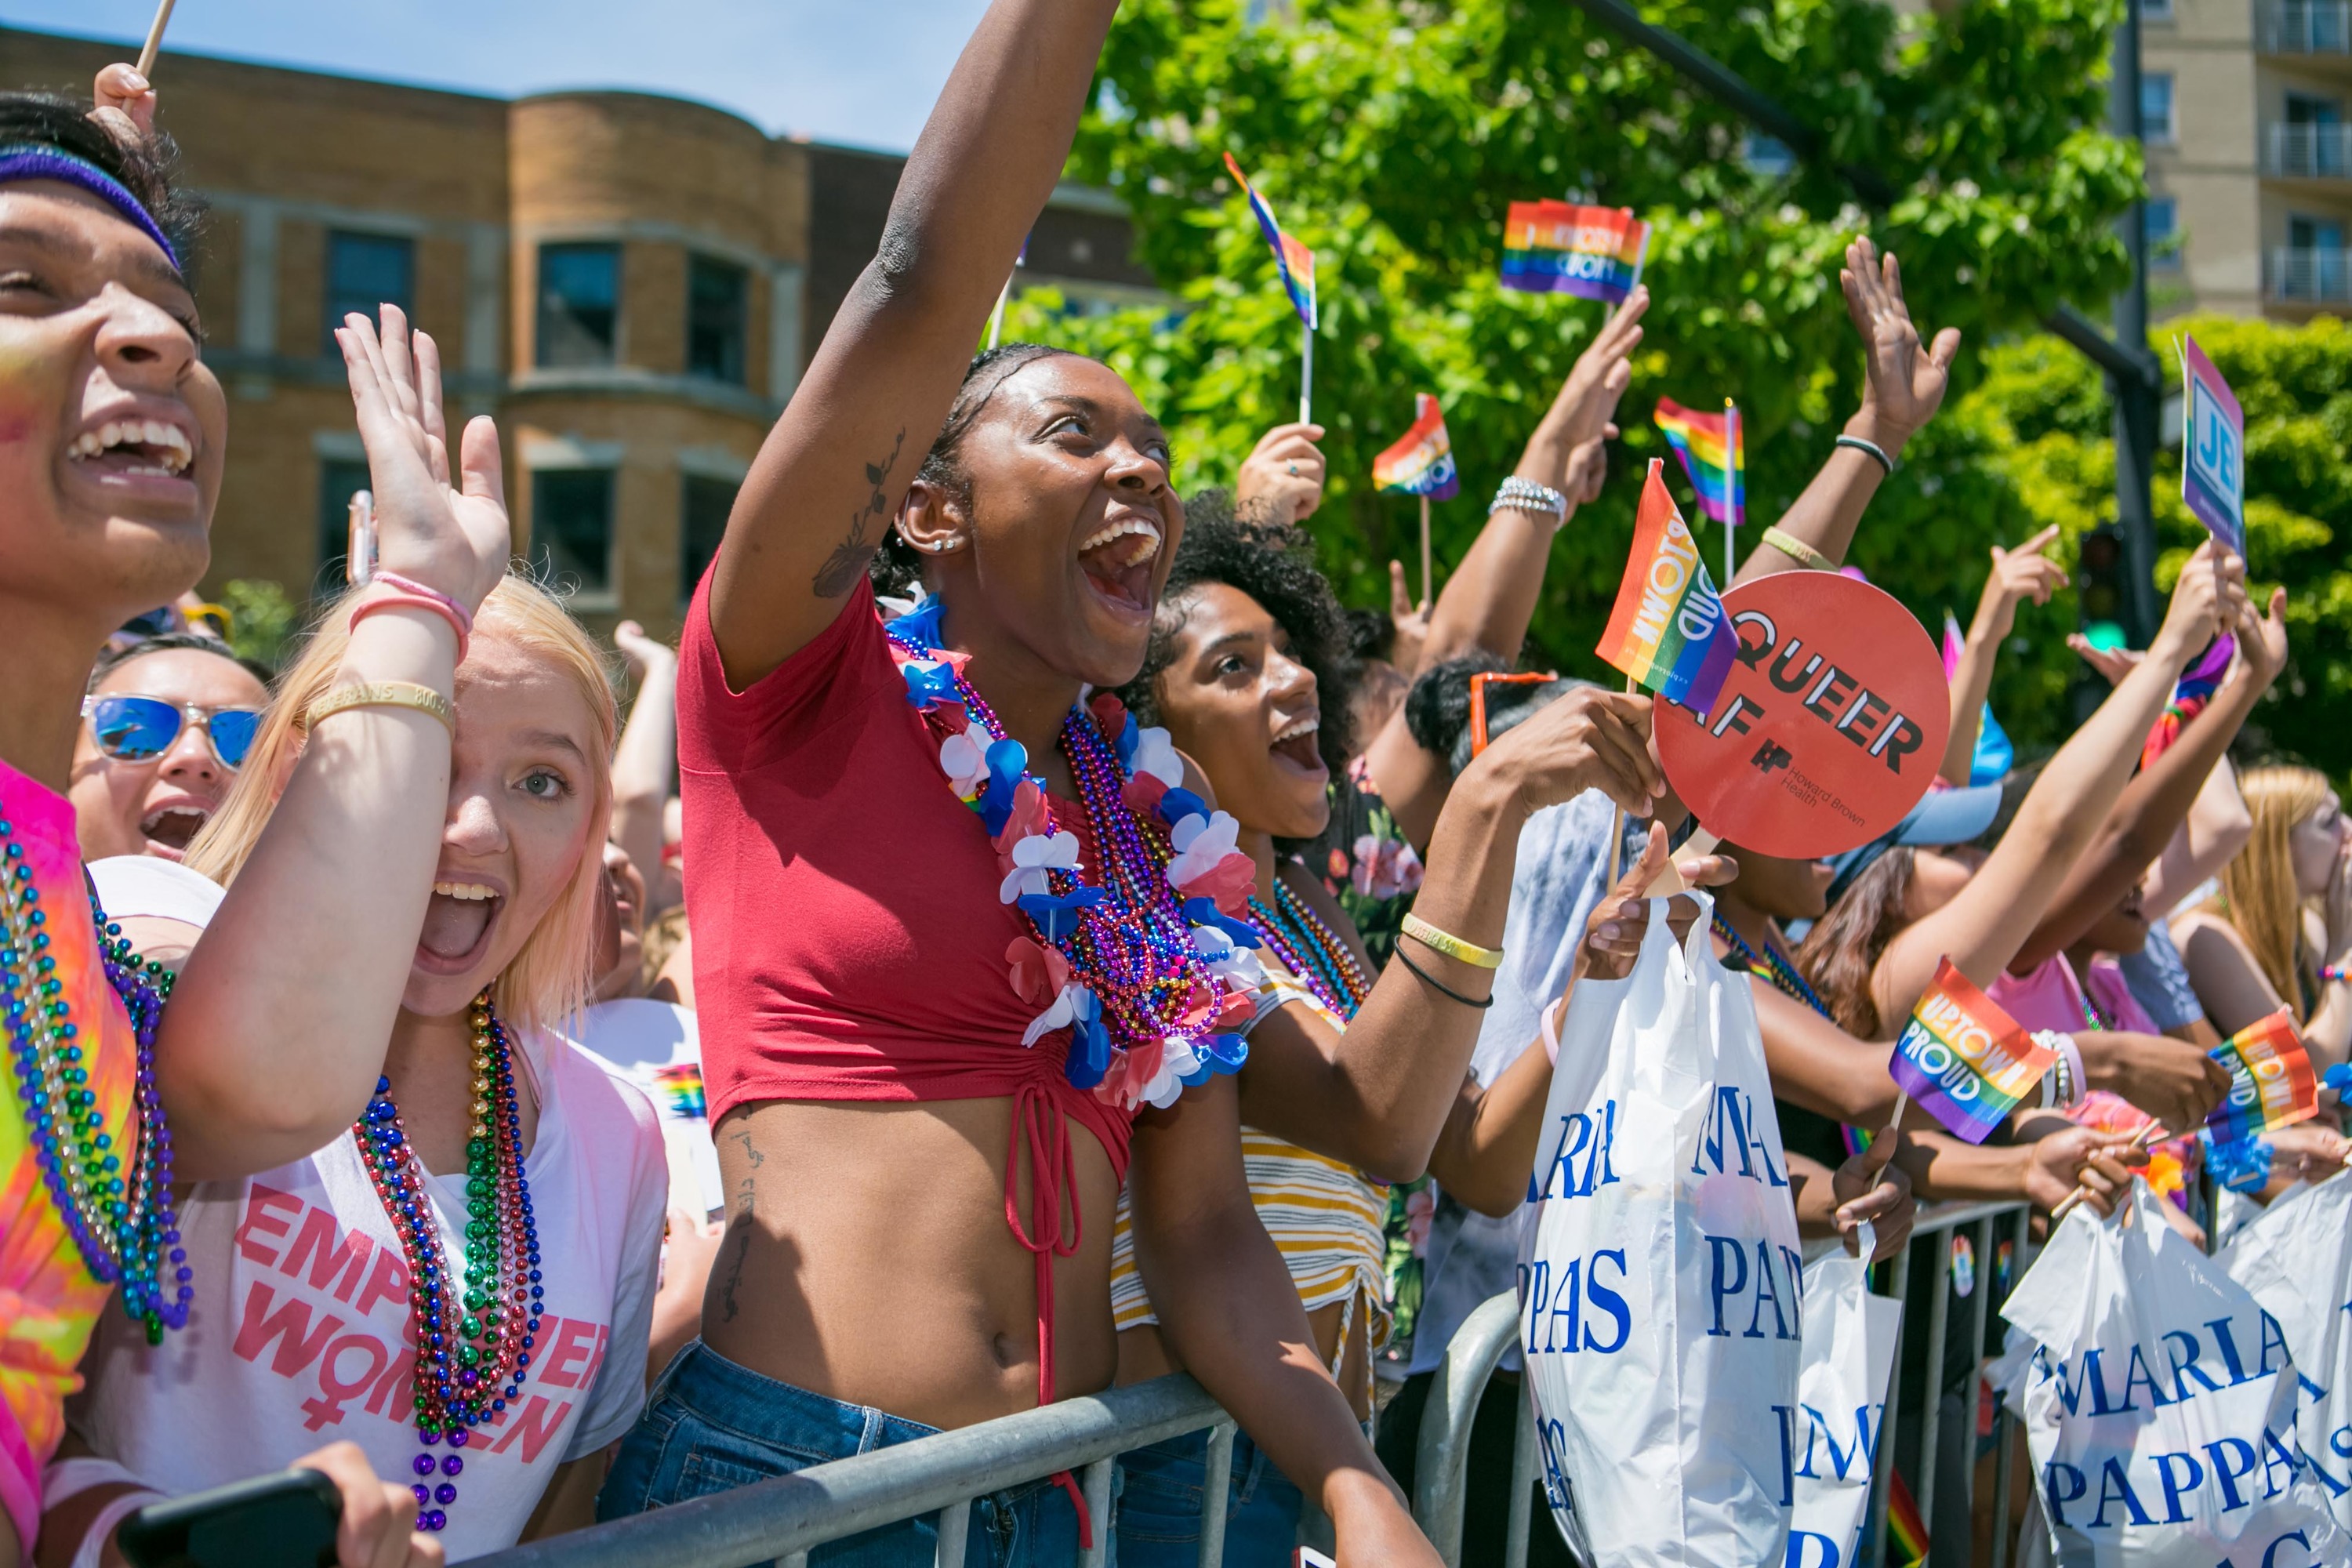 Check out photos from the Chicago Pride Parade